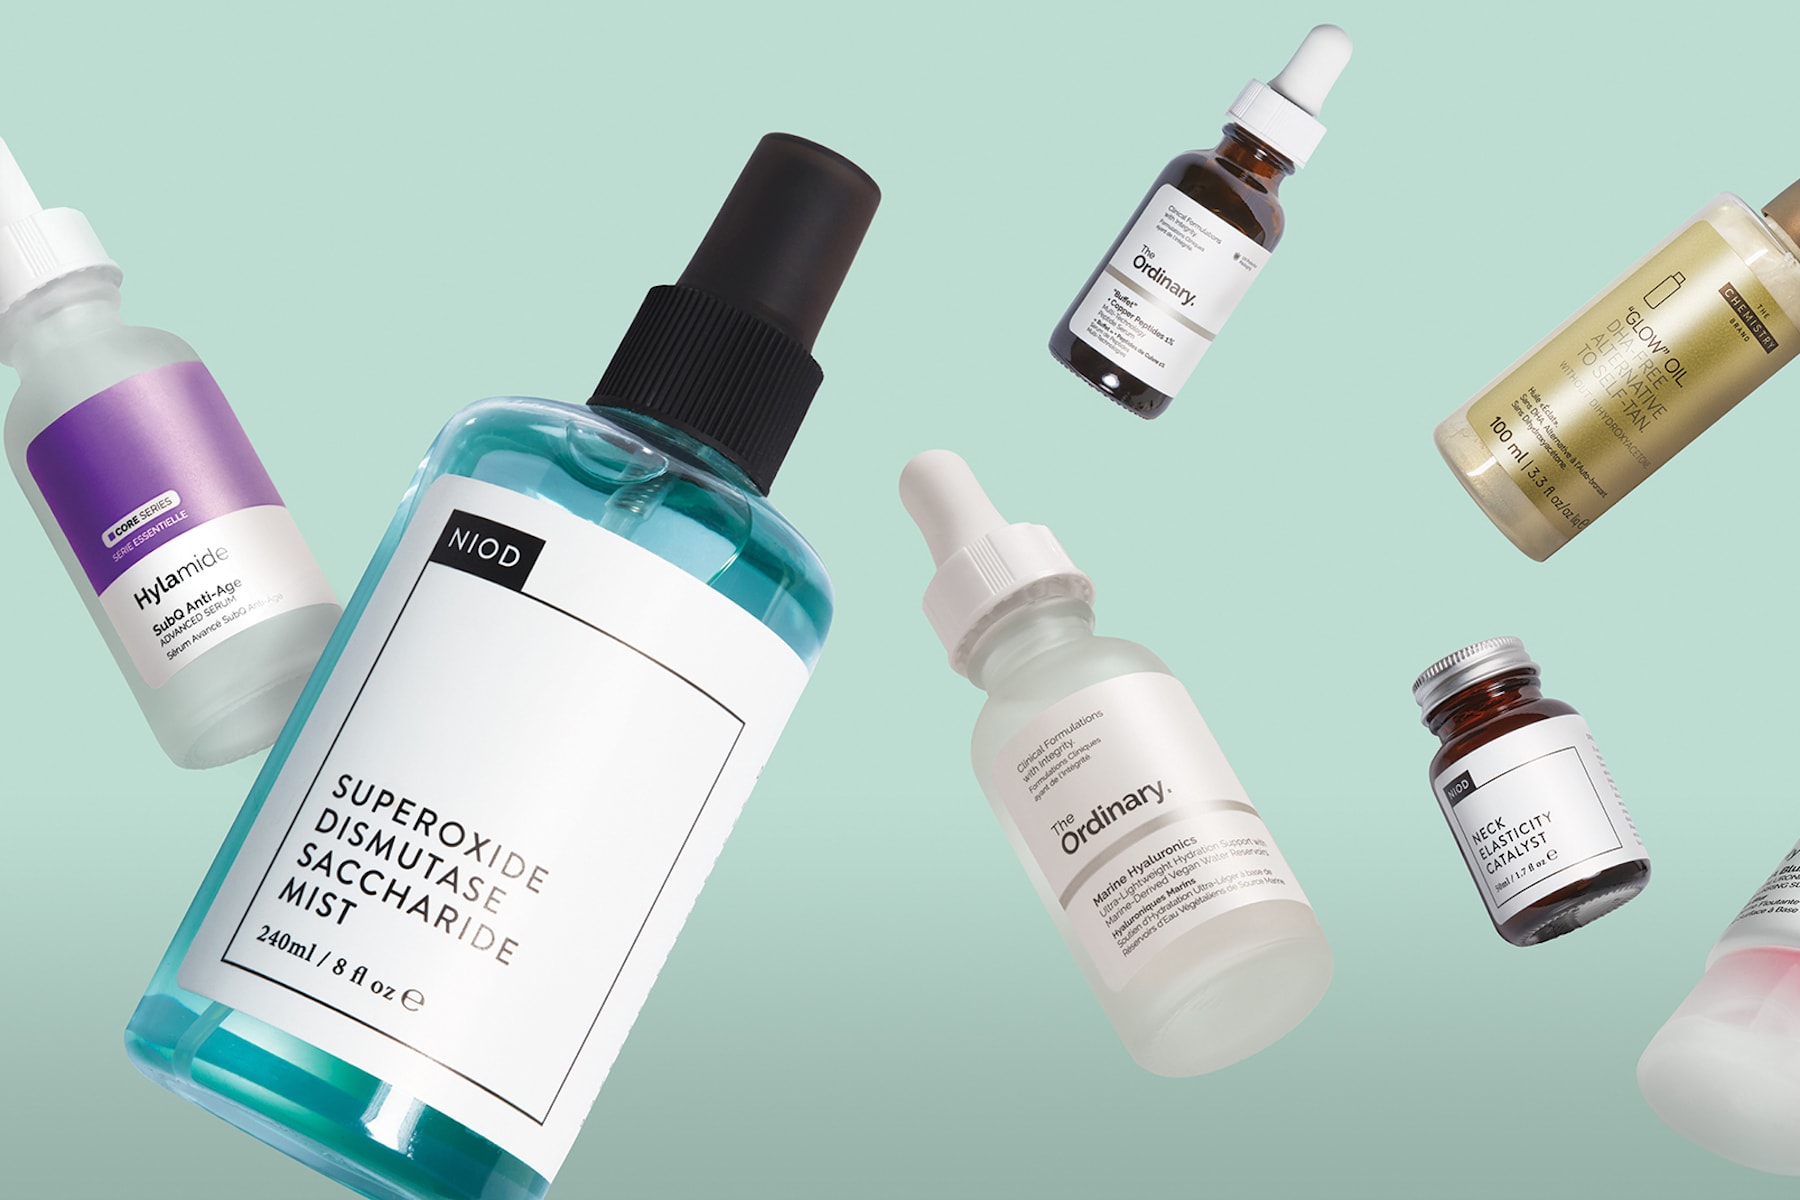 How Deciem and the Ordinary Fit Into Estee Lauder's Growth